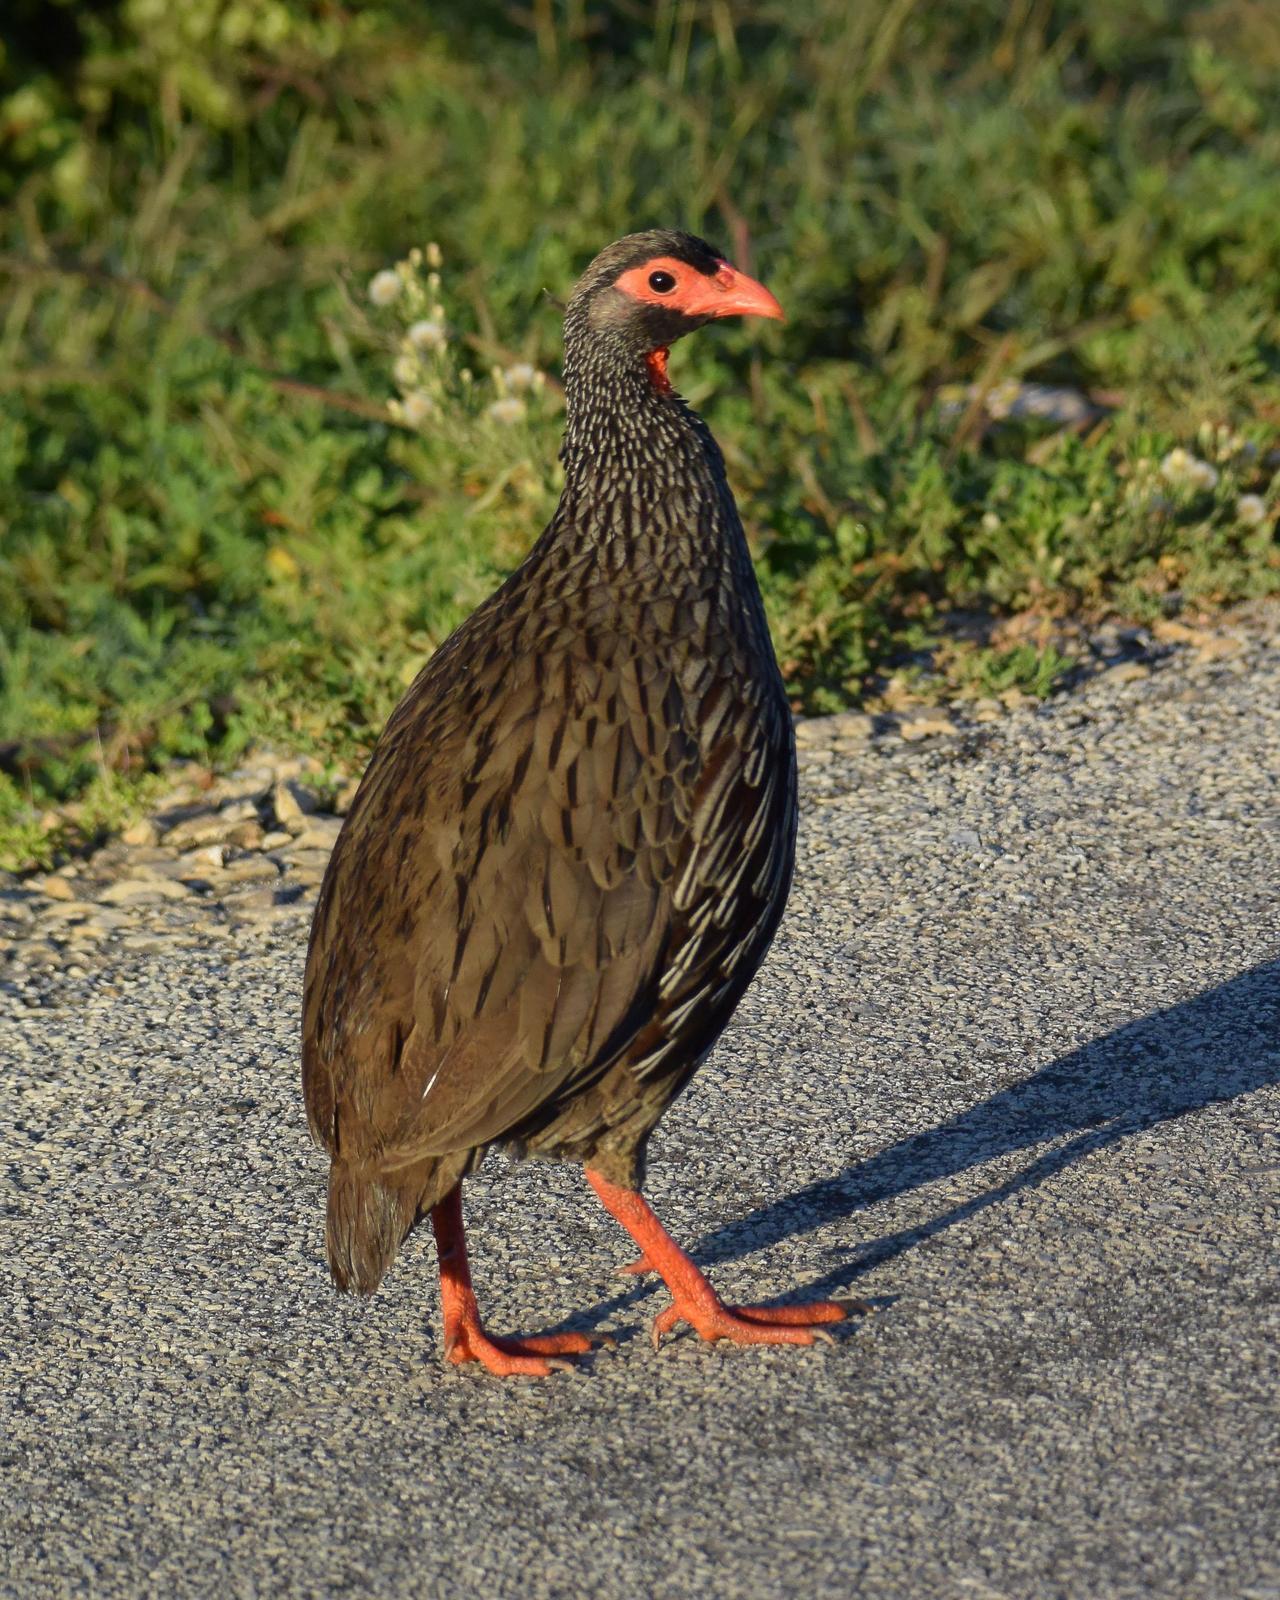 Red-necked Francolin Photo by Steve Percival